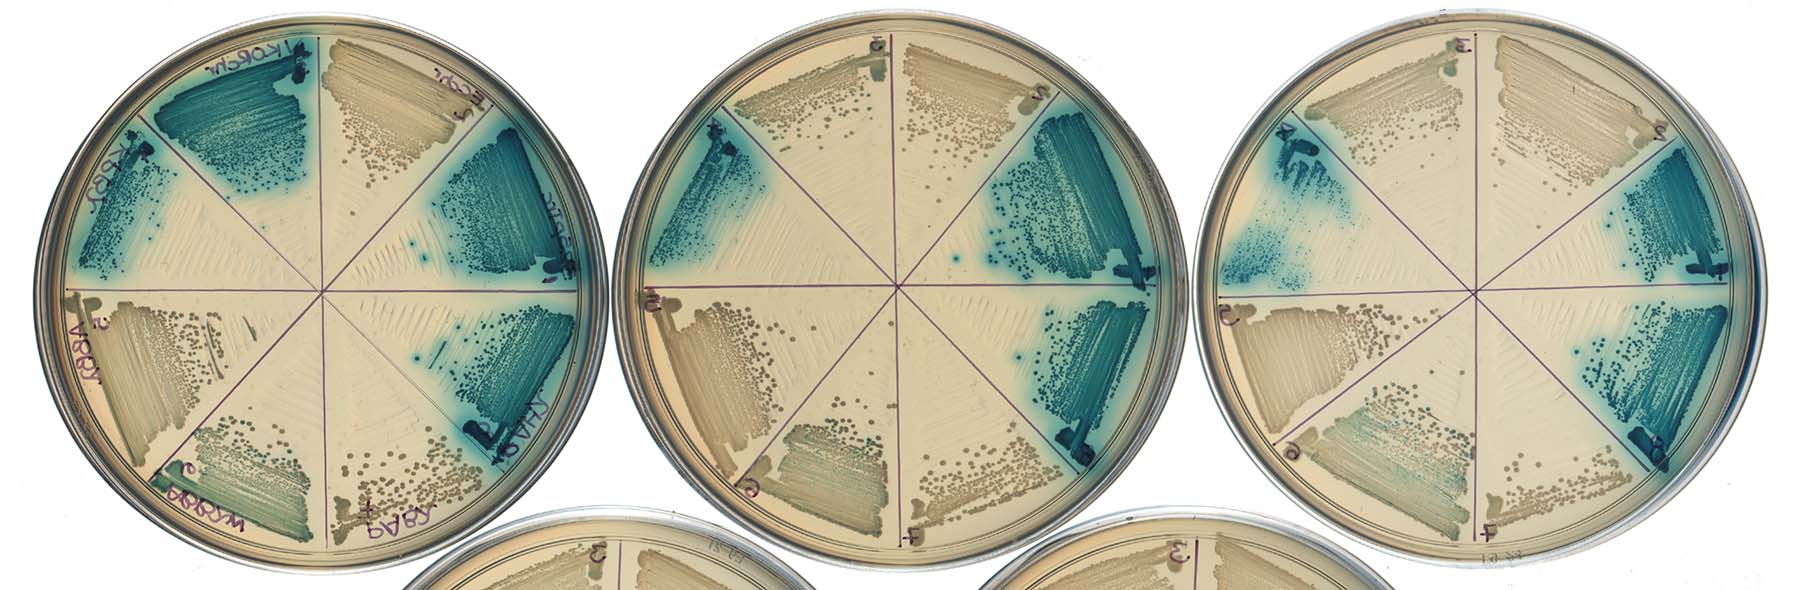 Xgal plate with bacteria